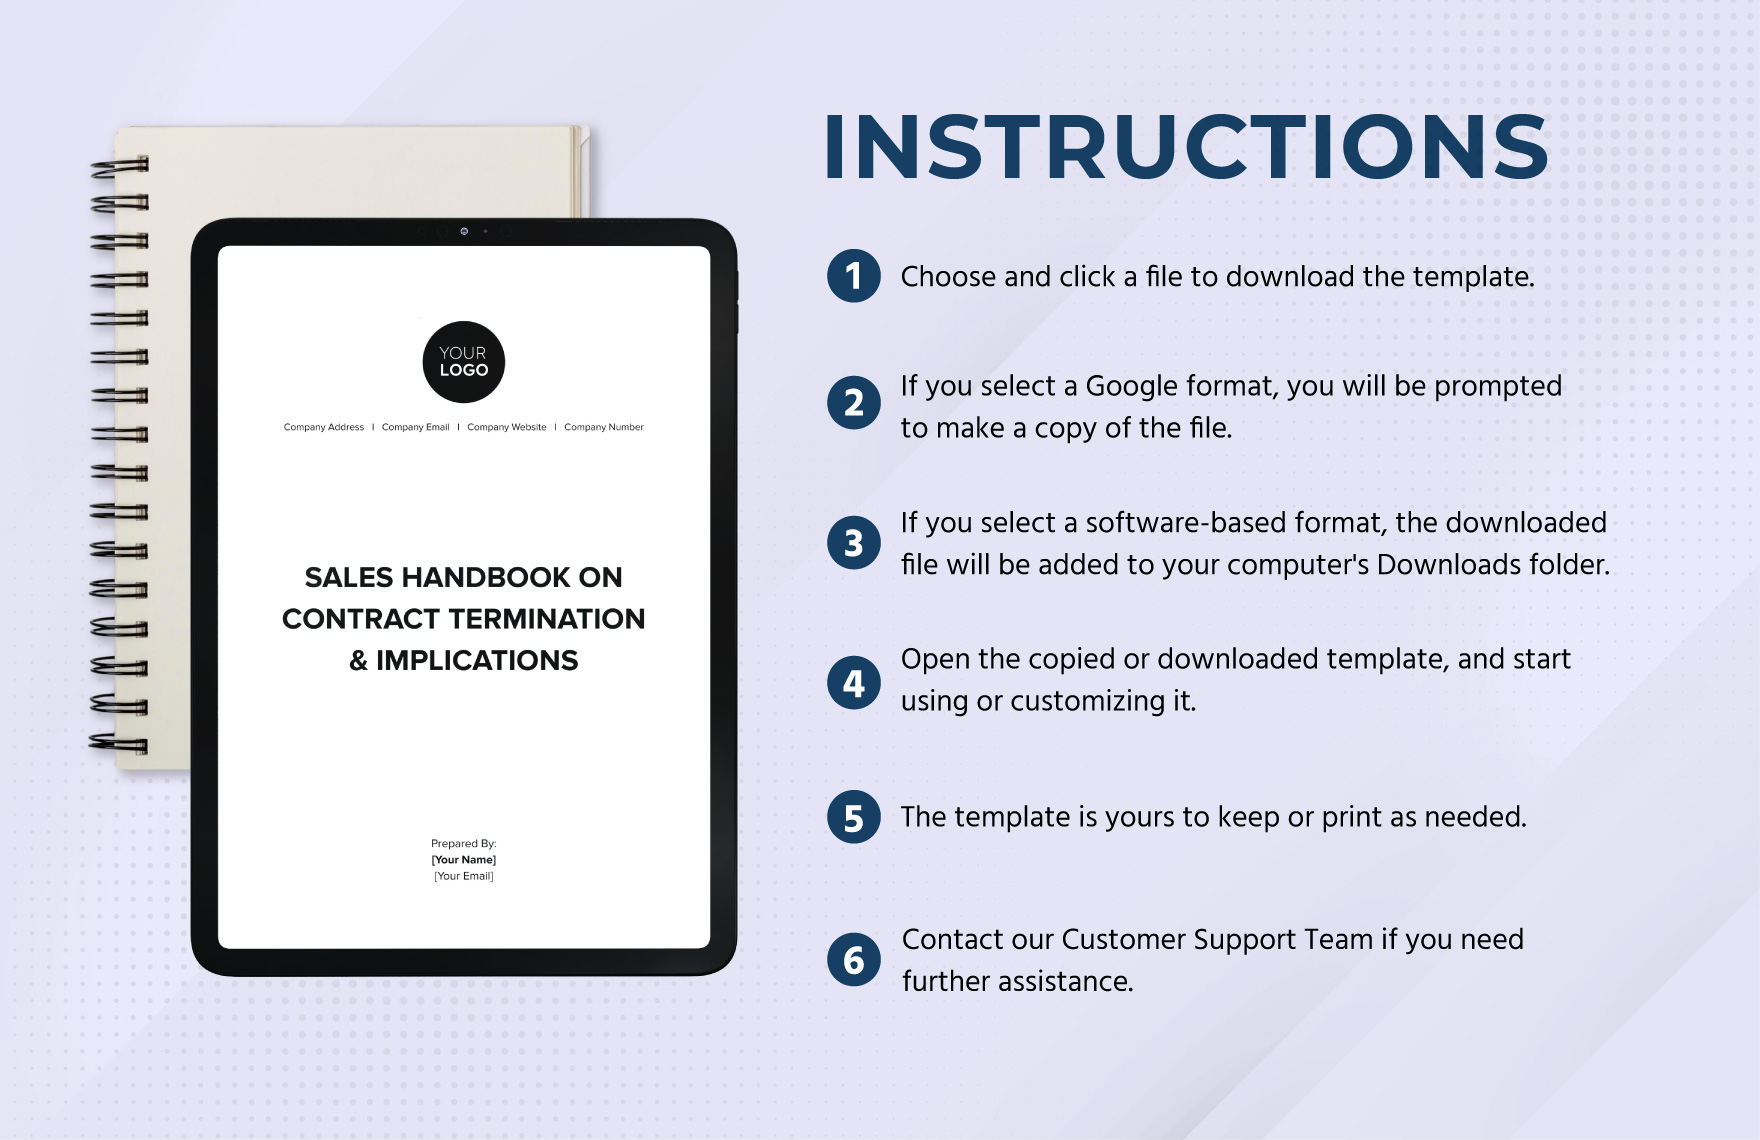 Sales Handbook on Contract Termination & Implications Template